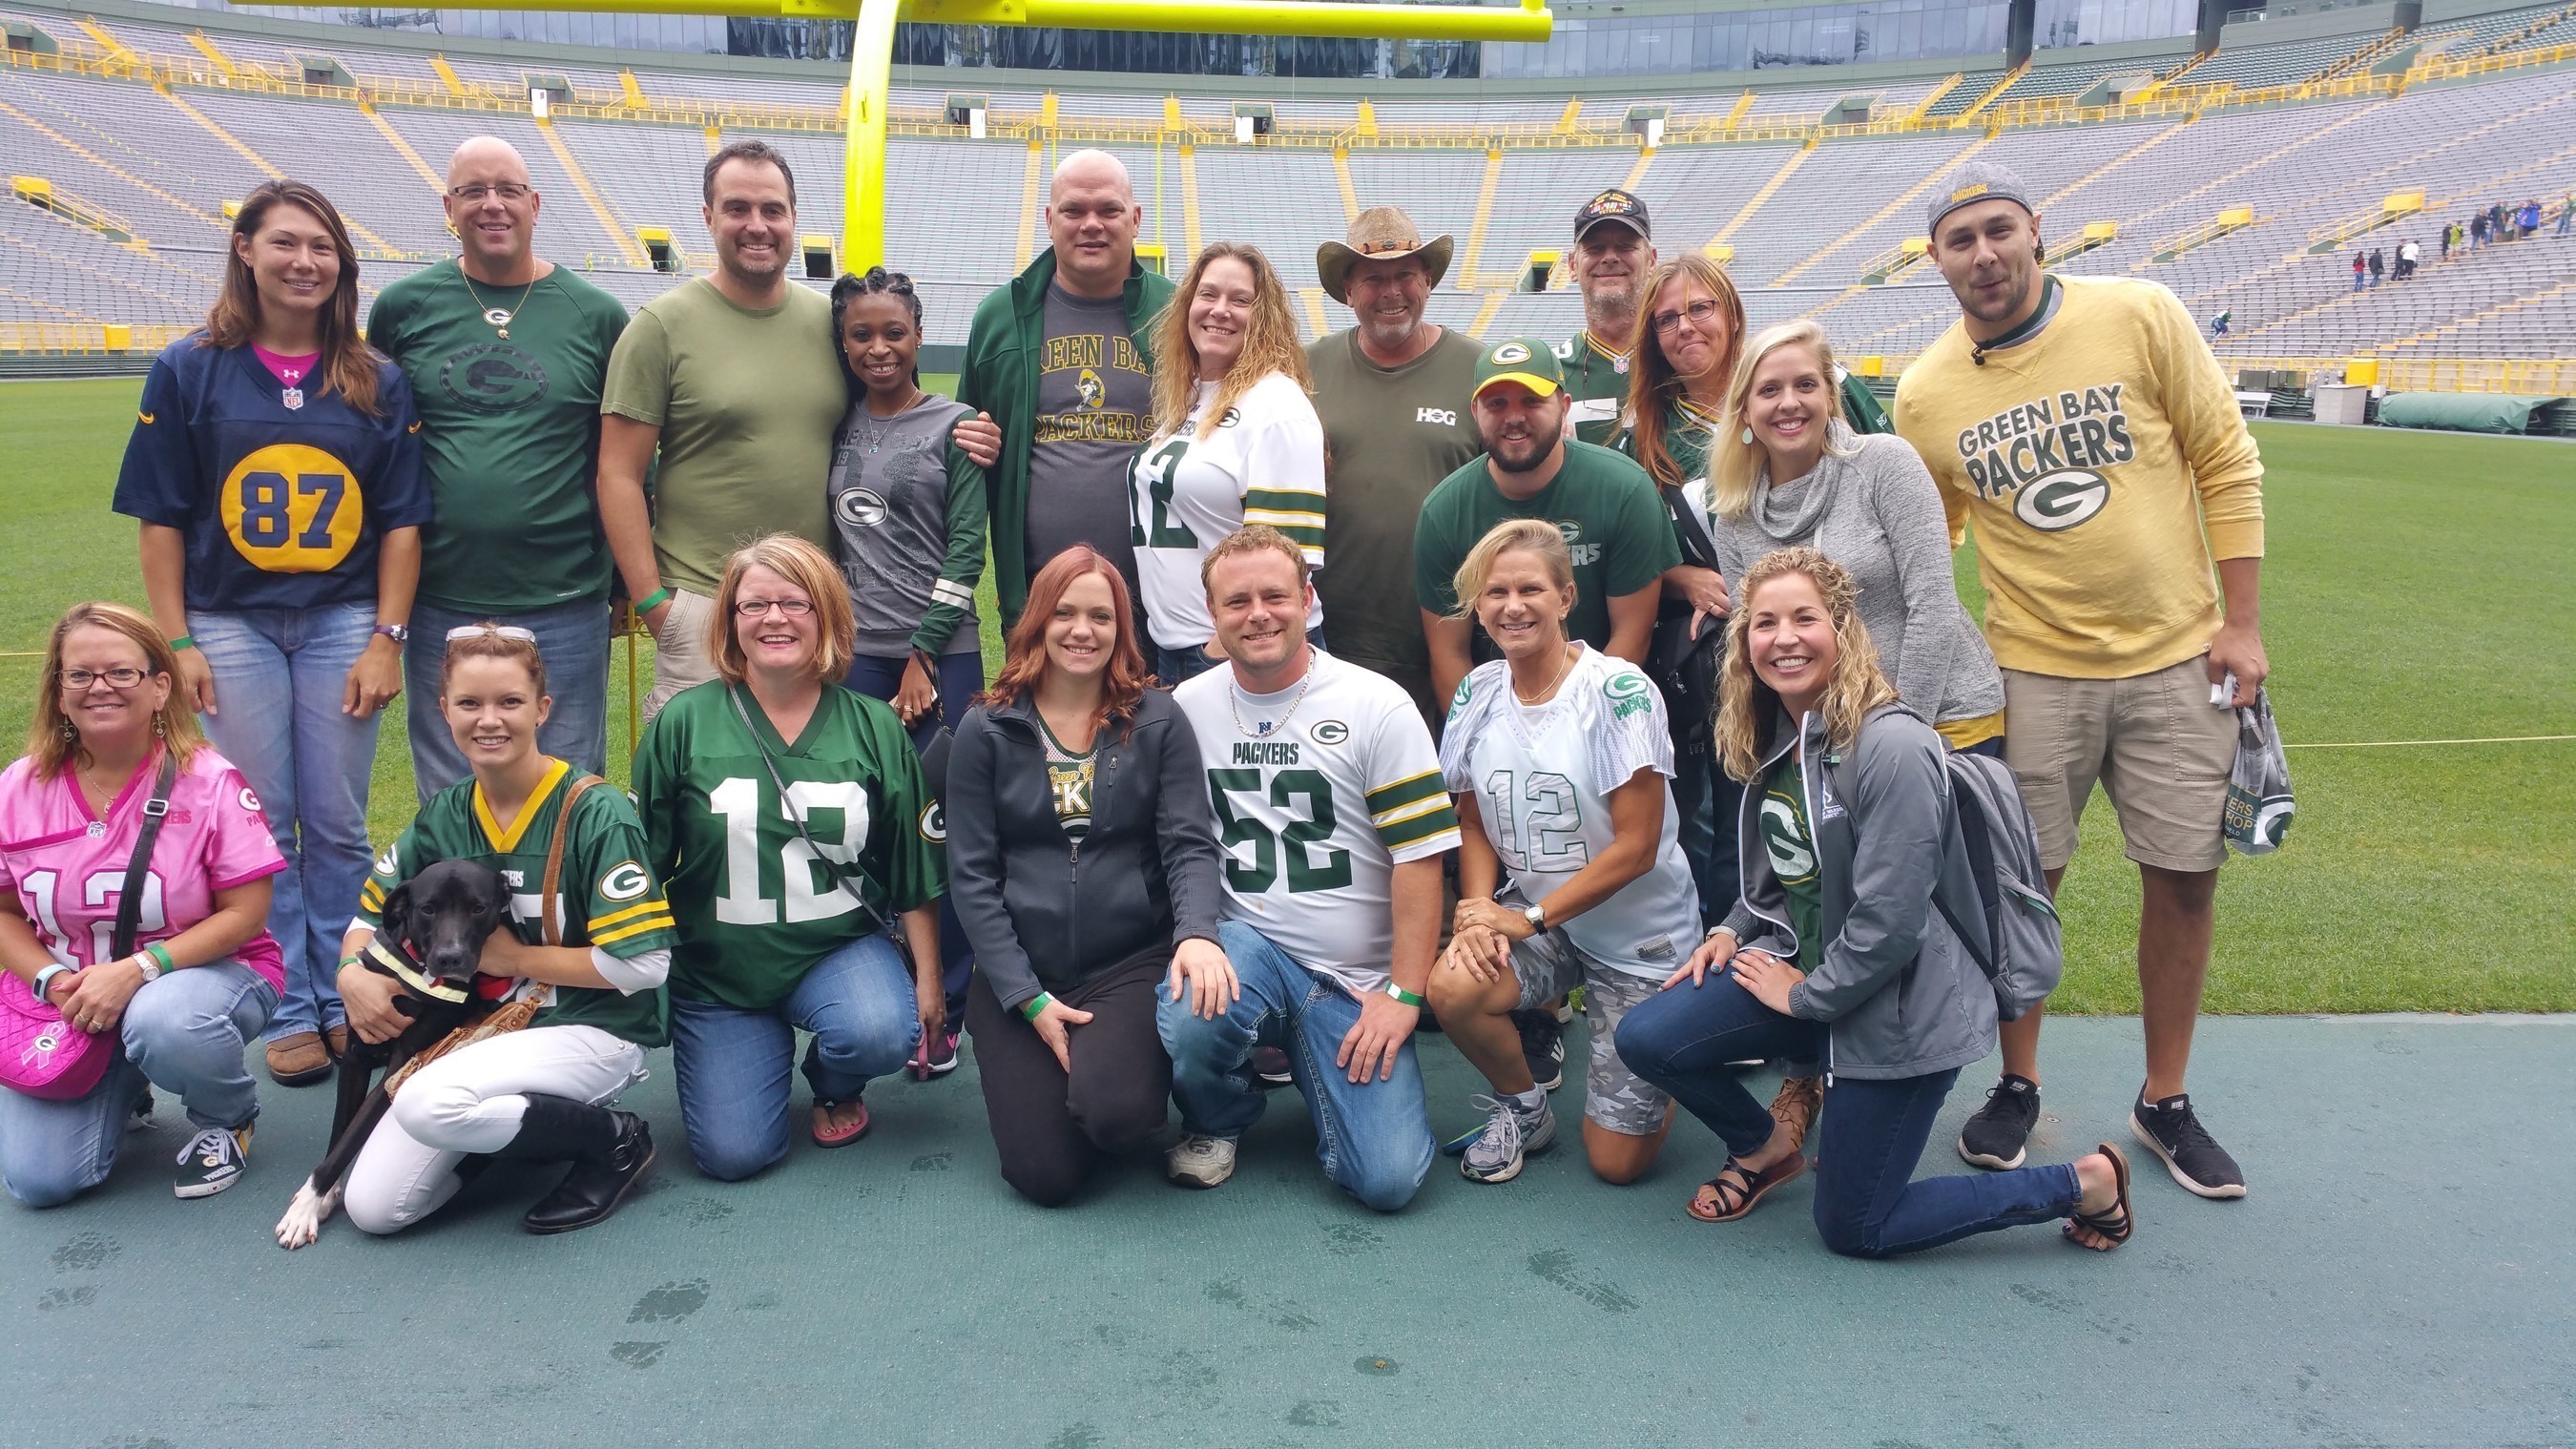 A group of veterans joined Wounded Warrior Project for a guided tour of Lambeau Field, home of the Green Bay Packers.